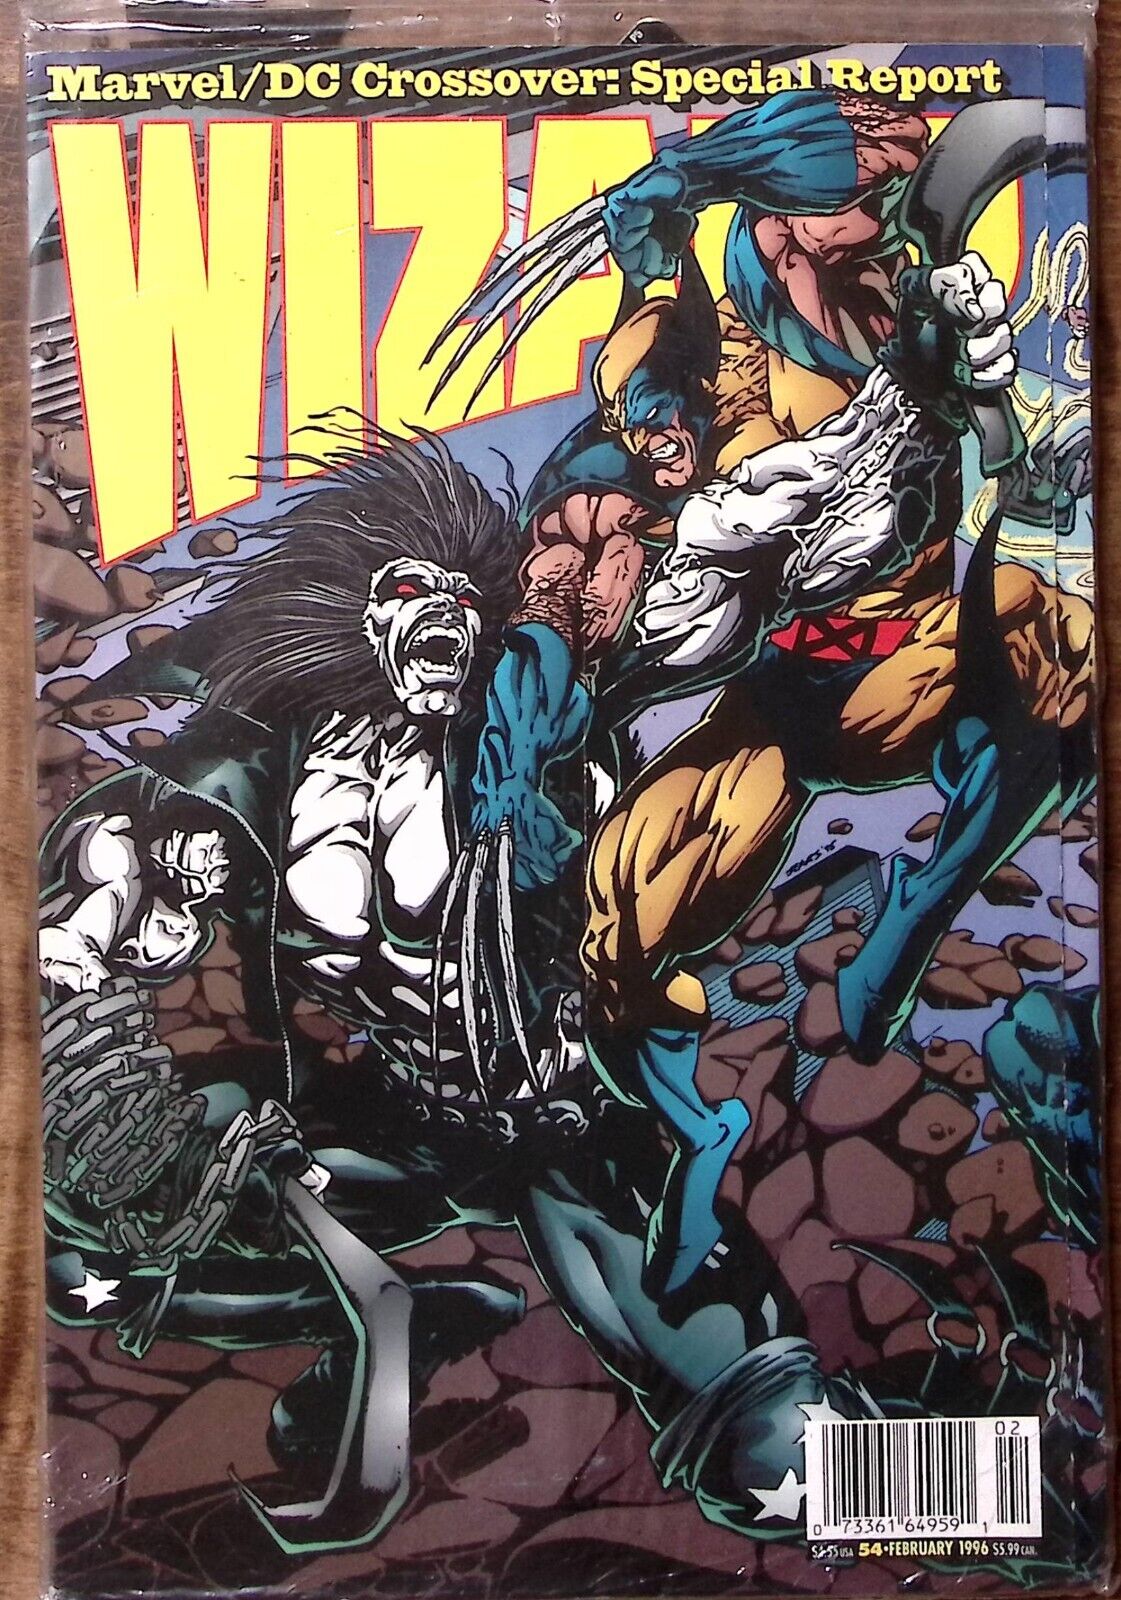 1996 WIZARD GUIDE TO COMICS #54 FEB MARVEL/DC CROSSOVER STILL SEALED  Z5029